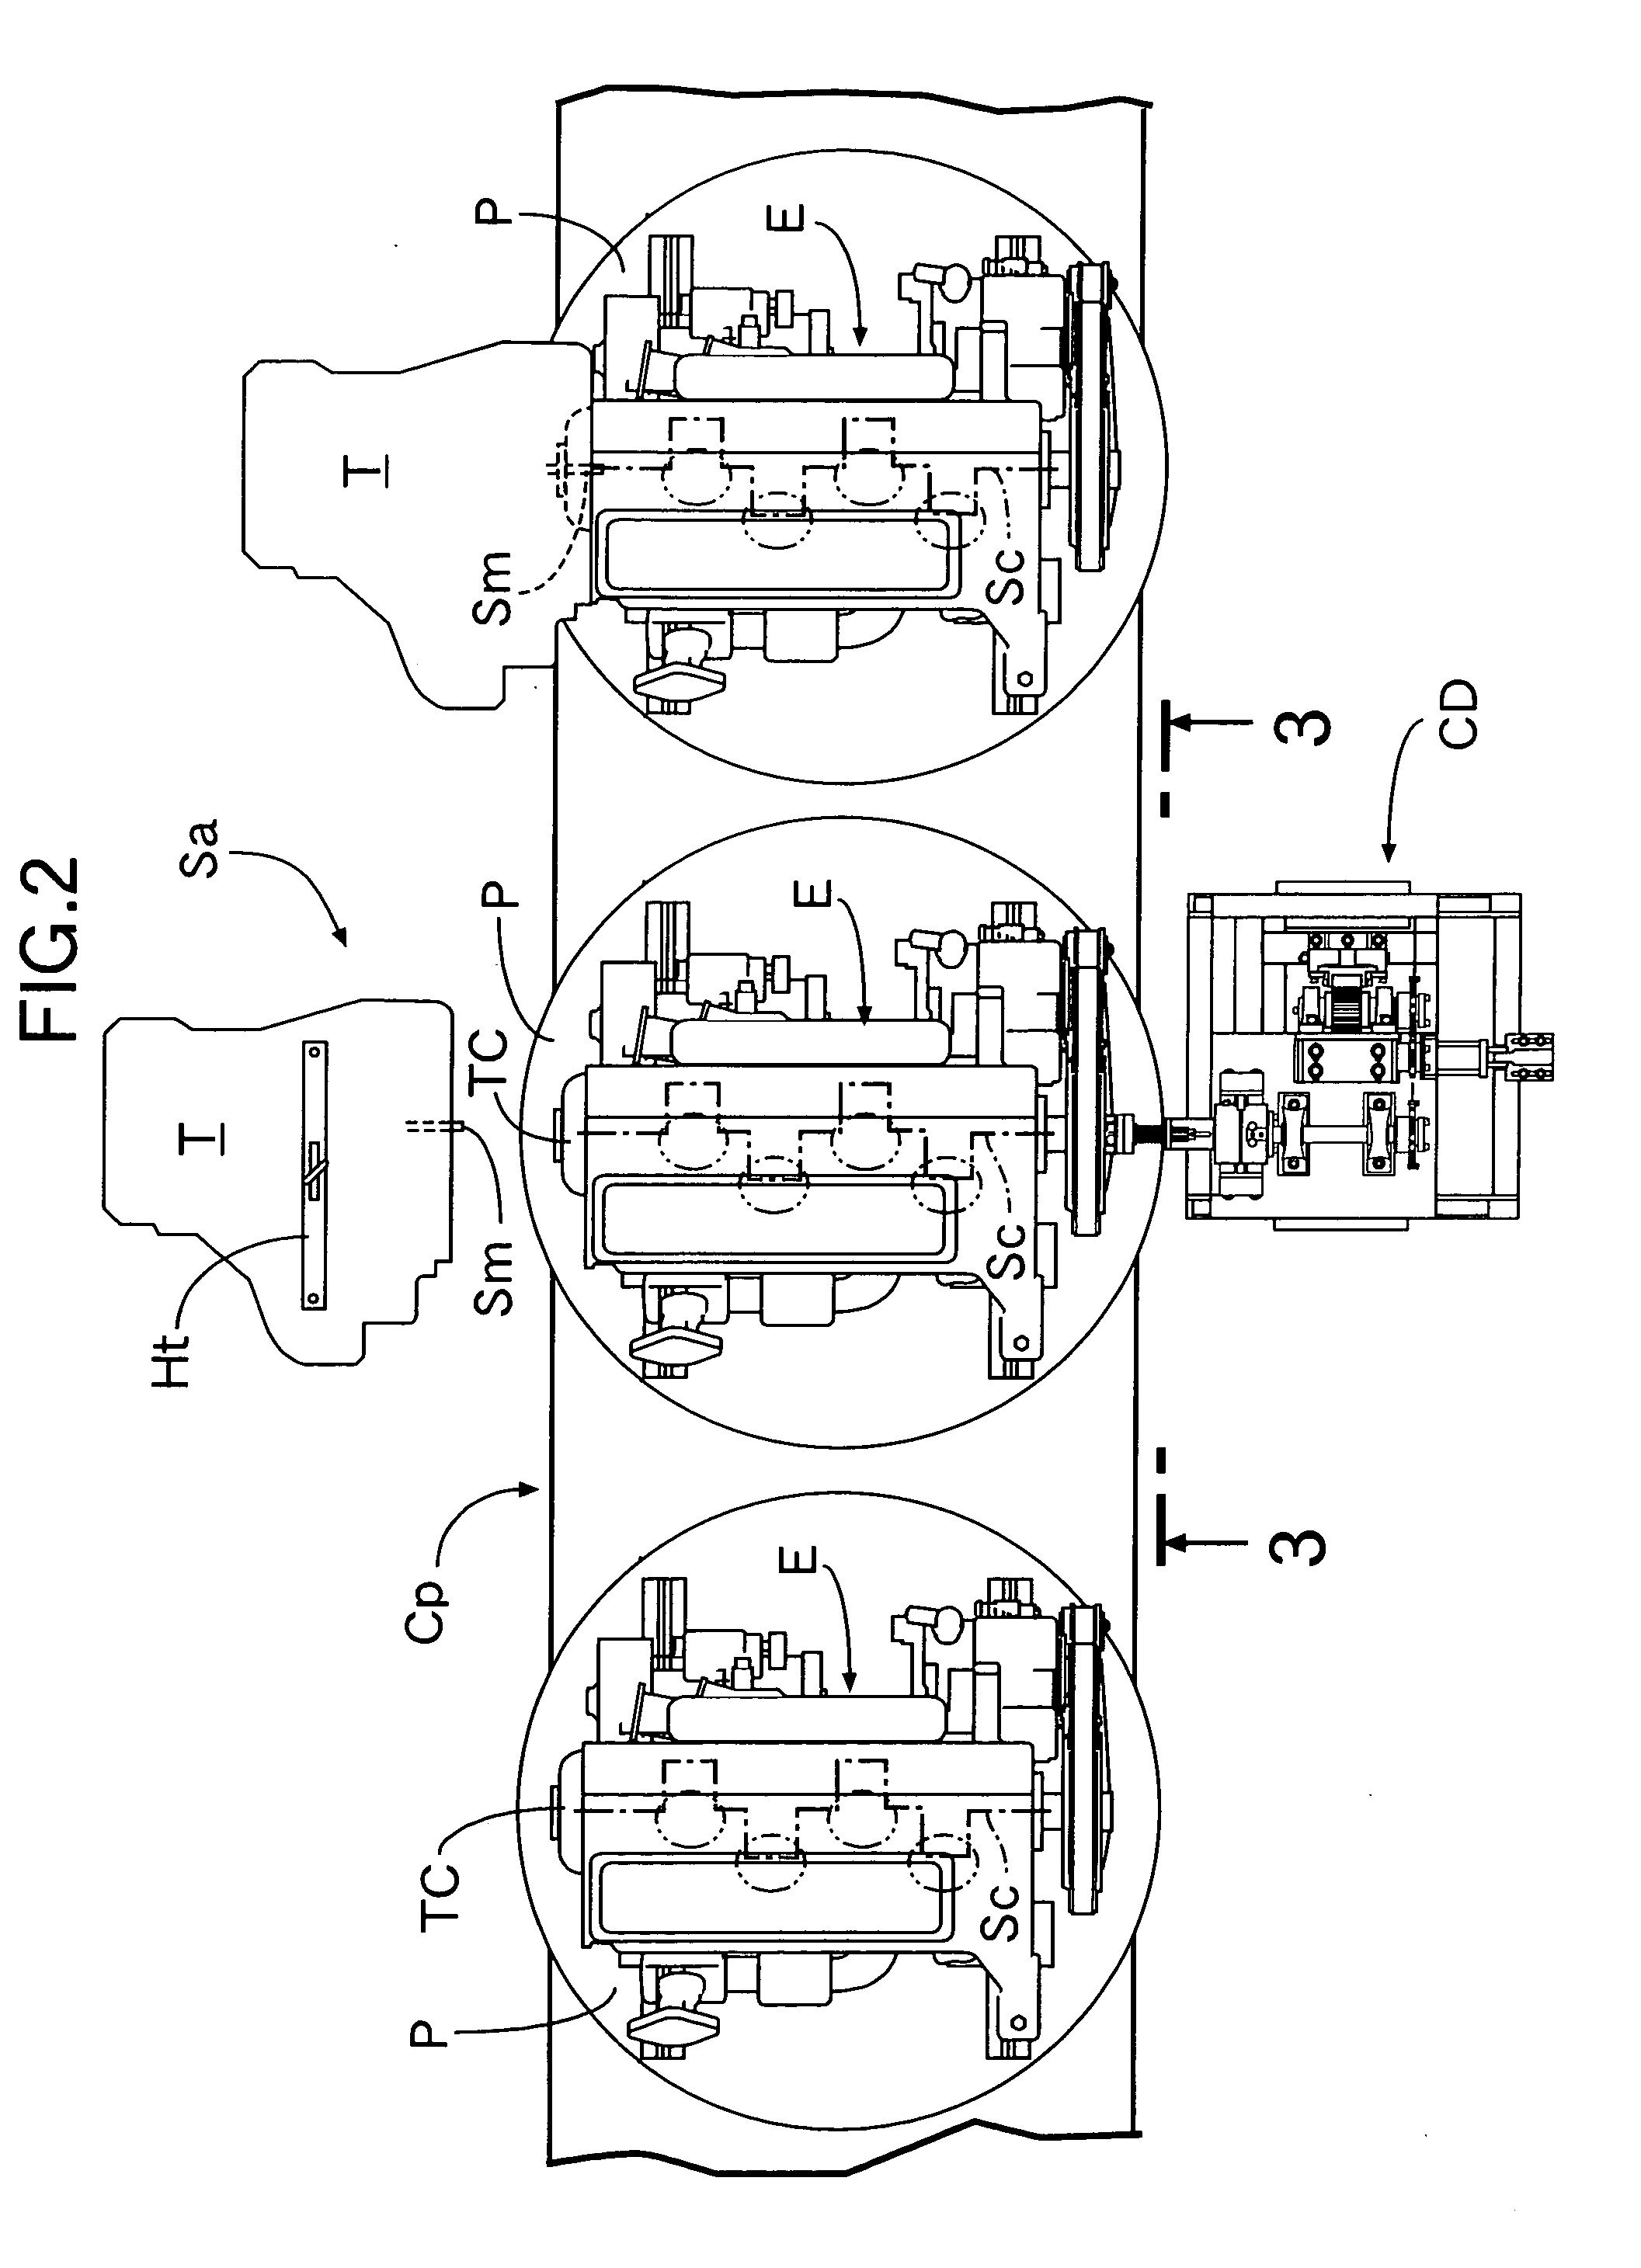 Work assembling auxiliary appratus and work assembling method